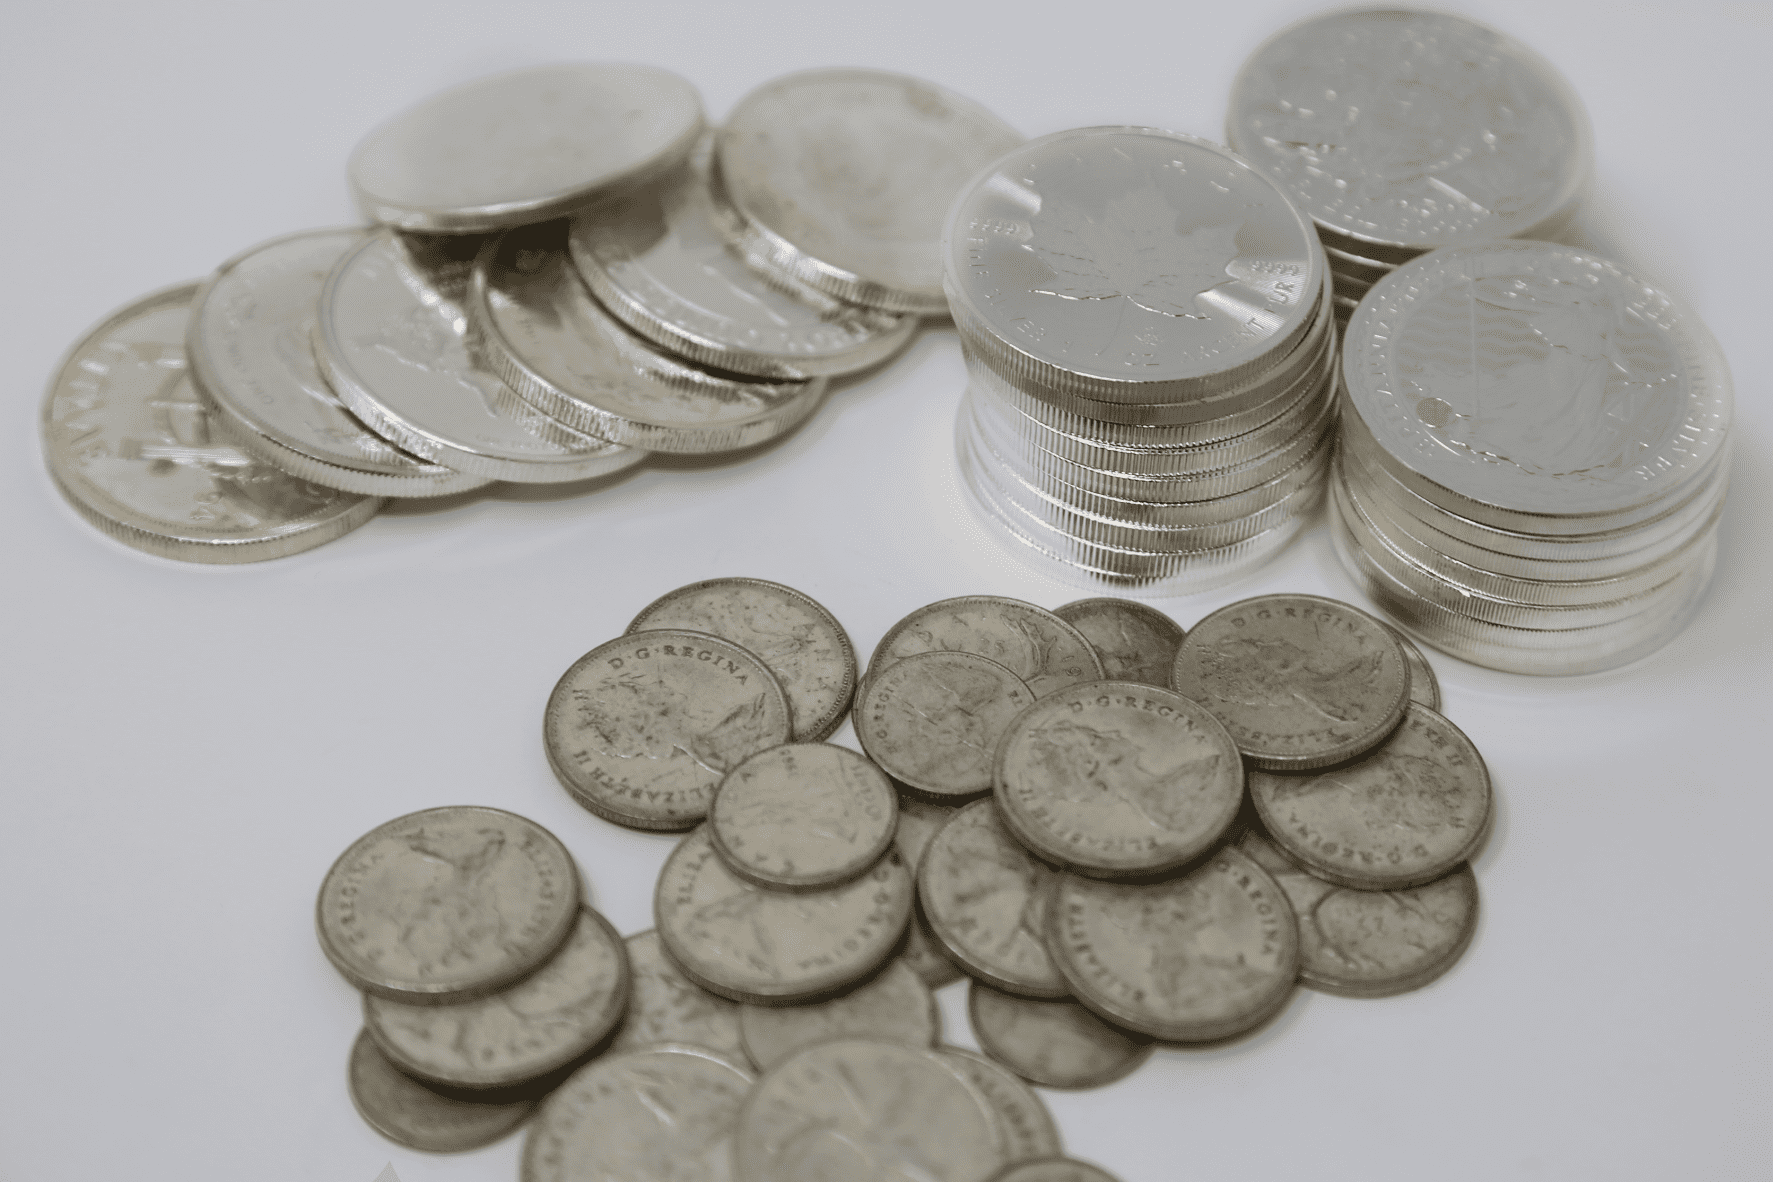 How to Sell Silver Coins - Your Ultimate Guide